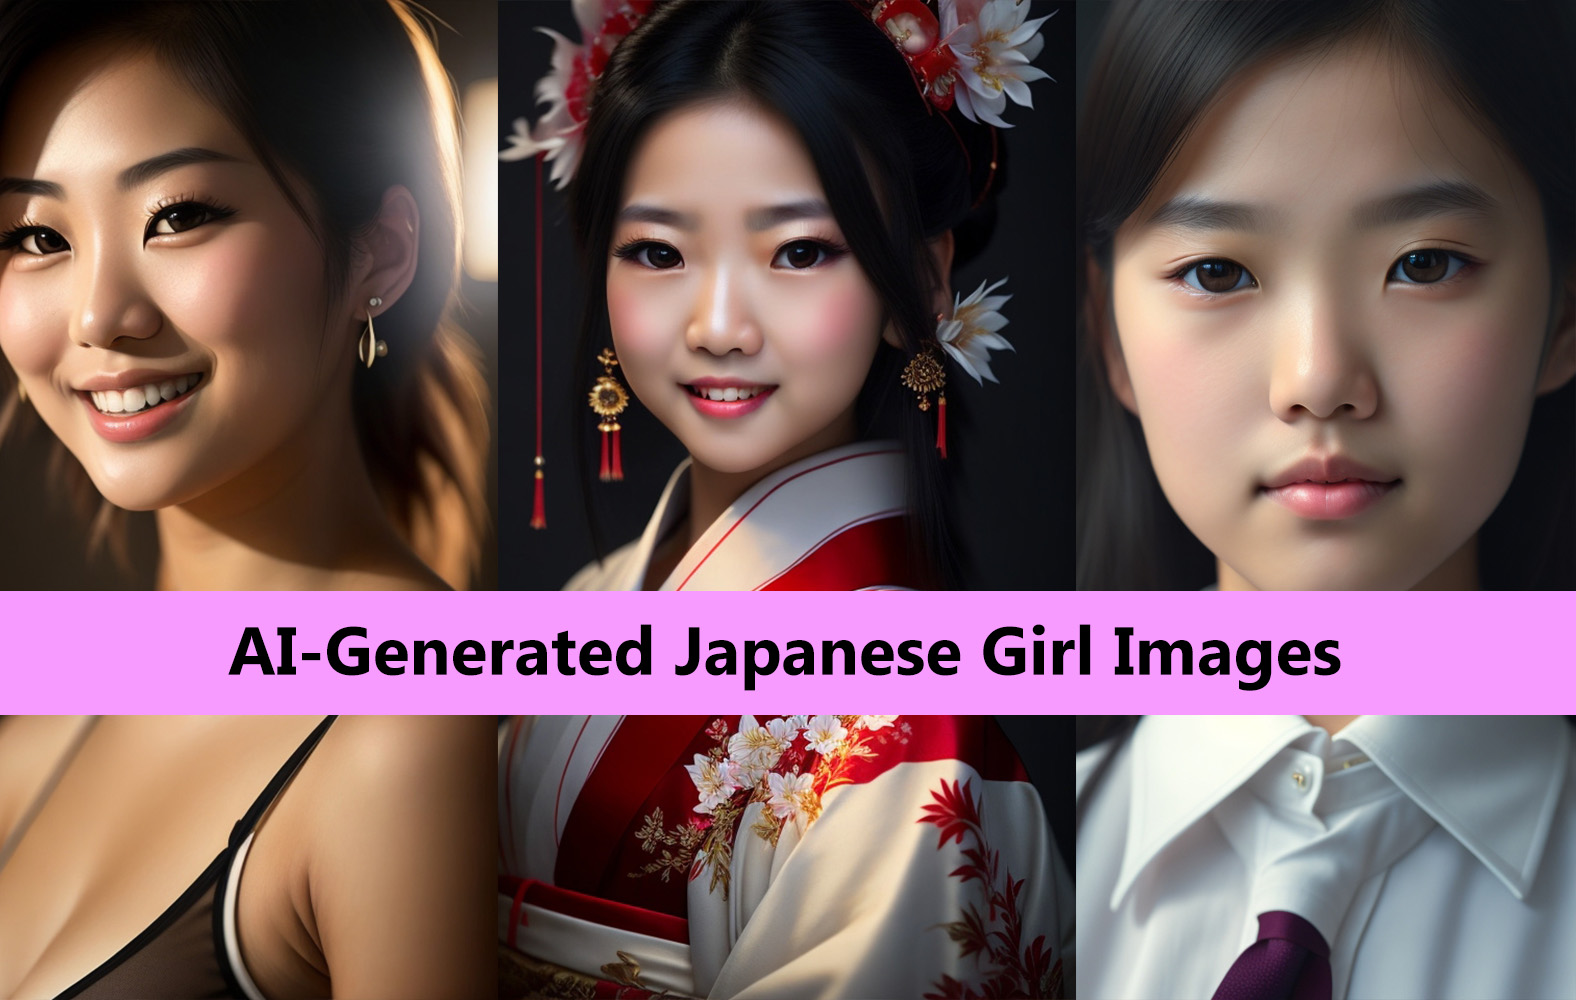 Discover the Beauty of Japanese Women in Unbelievably Realistic Images